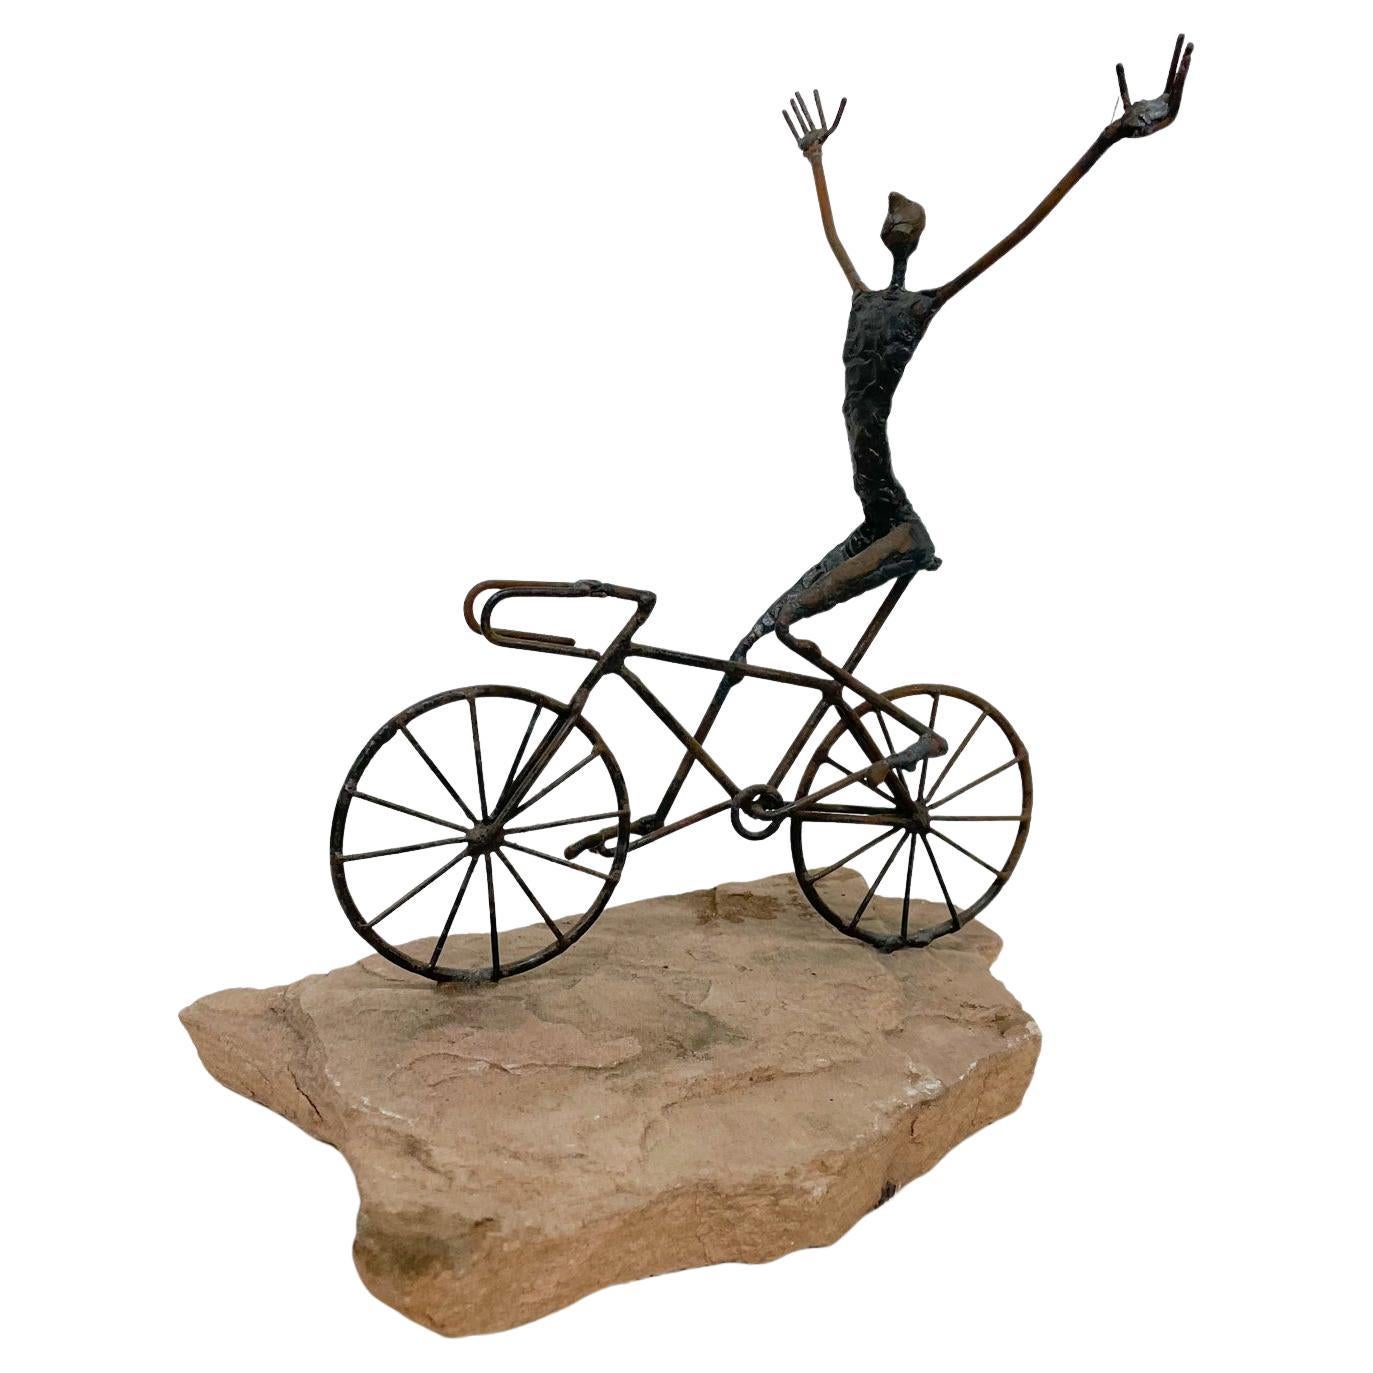 Bicycle Art Metal Sculpture on Stone in the Style of Jack Boyd 1970s